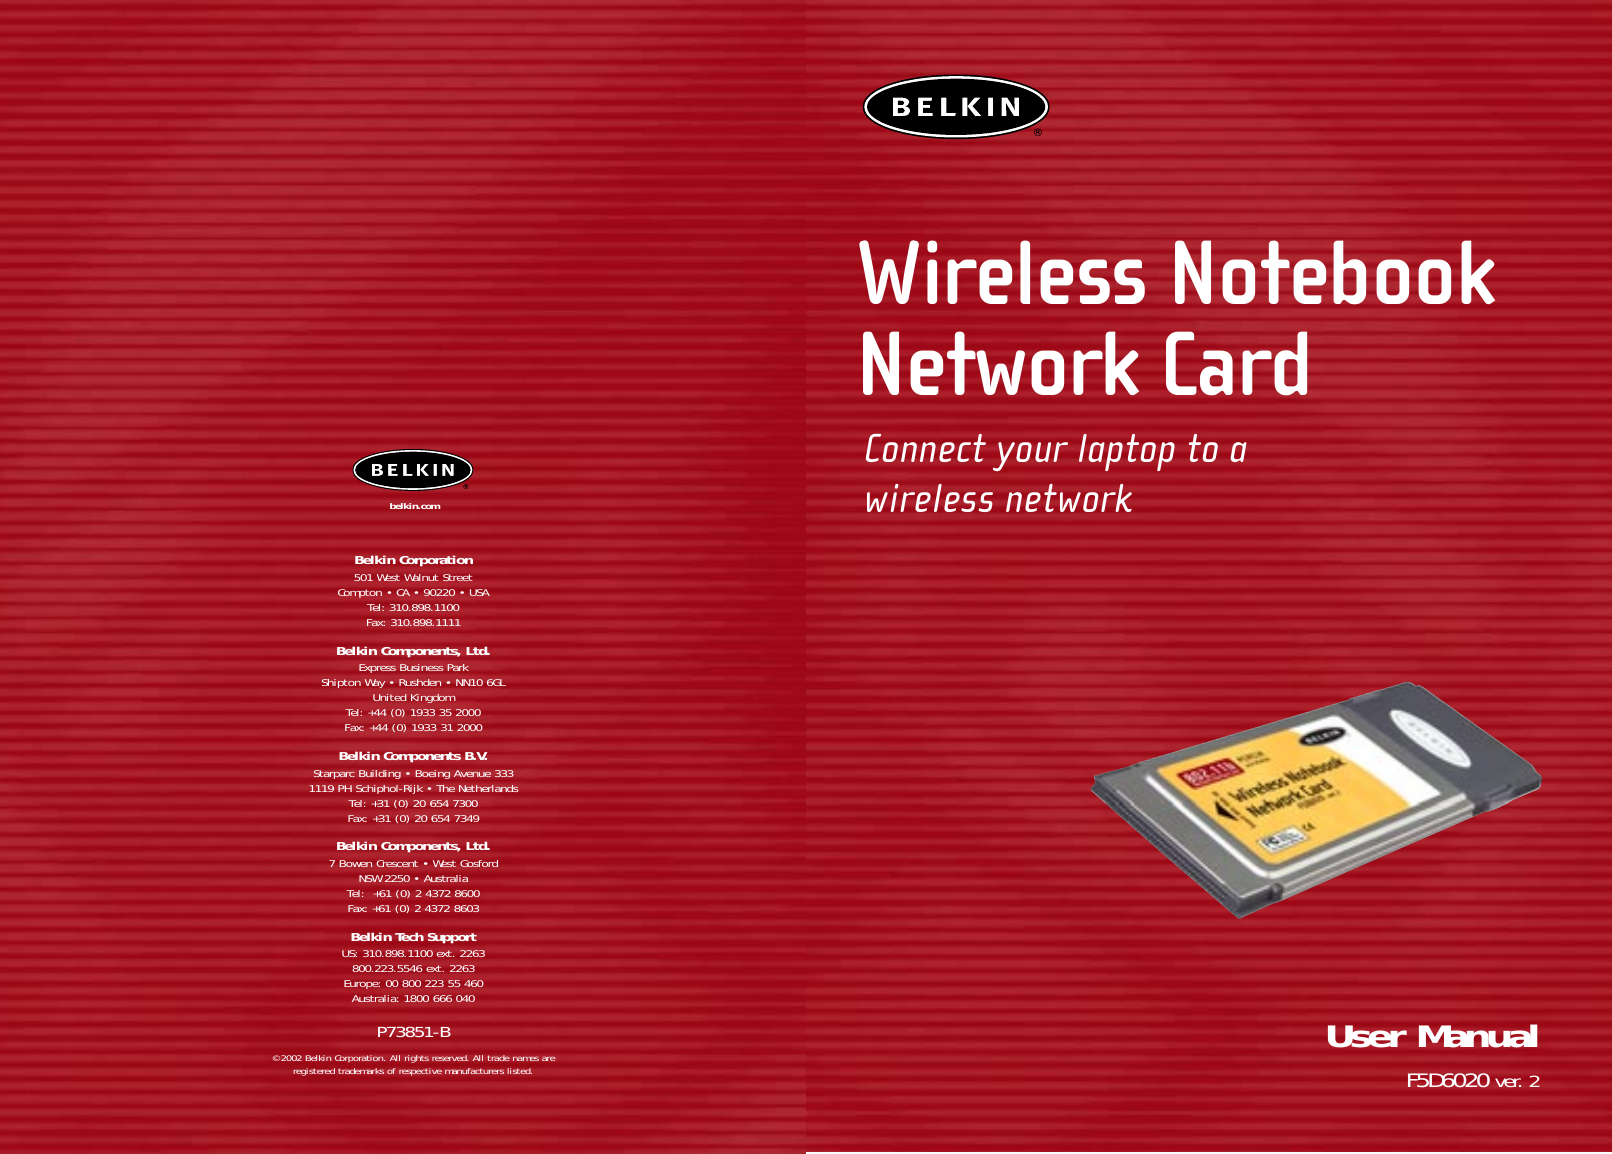 Wireless NotebookNetwork CardConnect your laptop to awireless networkUser ManualF5D6020 ver. 2Belkin Corporation501 West Walnut StreetCompton • CA • 90220 • USATel: 310.898.1100Fax: 310.898.1111Belkin Components, Ltd.Express Business ParkShipton Way • Rushden • NN10 6GLUnited KingdomTel: +44 (0) 1933 35 2000Fax: +44 (0) 1933 31 2000Belkin Components B.V.Starparc Building • Boeing Avenue 3331119 PH Schiphol-Rijk • The NetherlandsTel: +31 (0) 20 654 7300Fax: +31 (0) 20 654 7349Belkin Components, Ltd.7 Bowen Crescent • West GosfordNSW 2250 • AustraliaTel:  +61 (0) 2 4372 8600Fax: +61 (0) 2 4372 8603Belkin Tech SupportUS: 310.898.1100 ext. 2263800.223.5546 ext. 2263Europe: 00 800 223 55 460Australia: 1800 666 040P73851-B© 2002 Belkin Corporation. All rights reserved. All trade names are registered trademarks of respective manufacturers listed.belkin.com